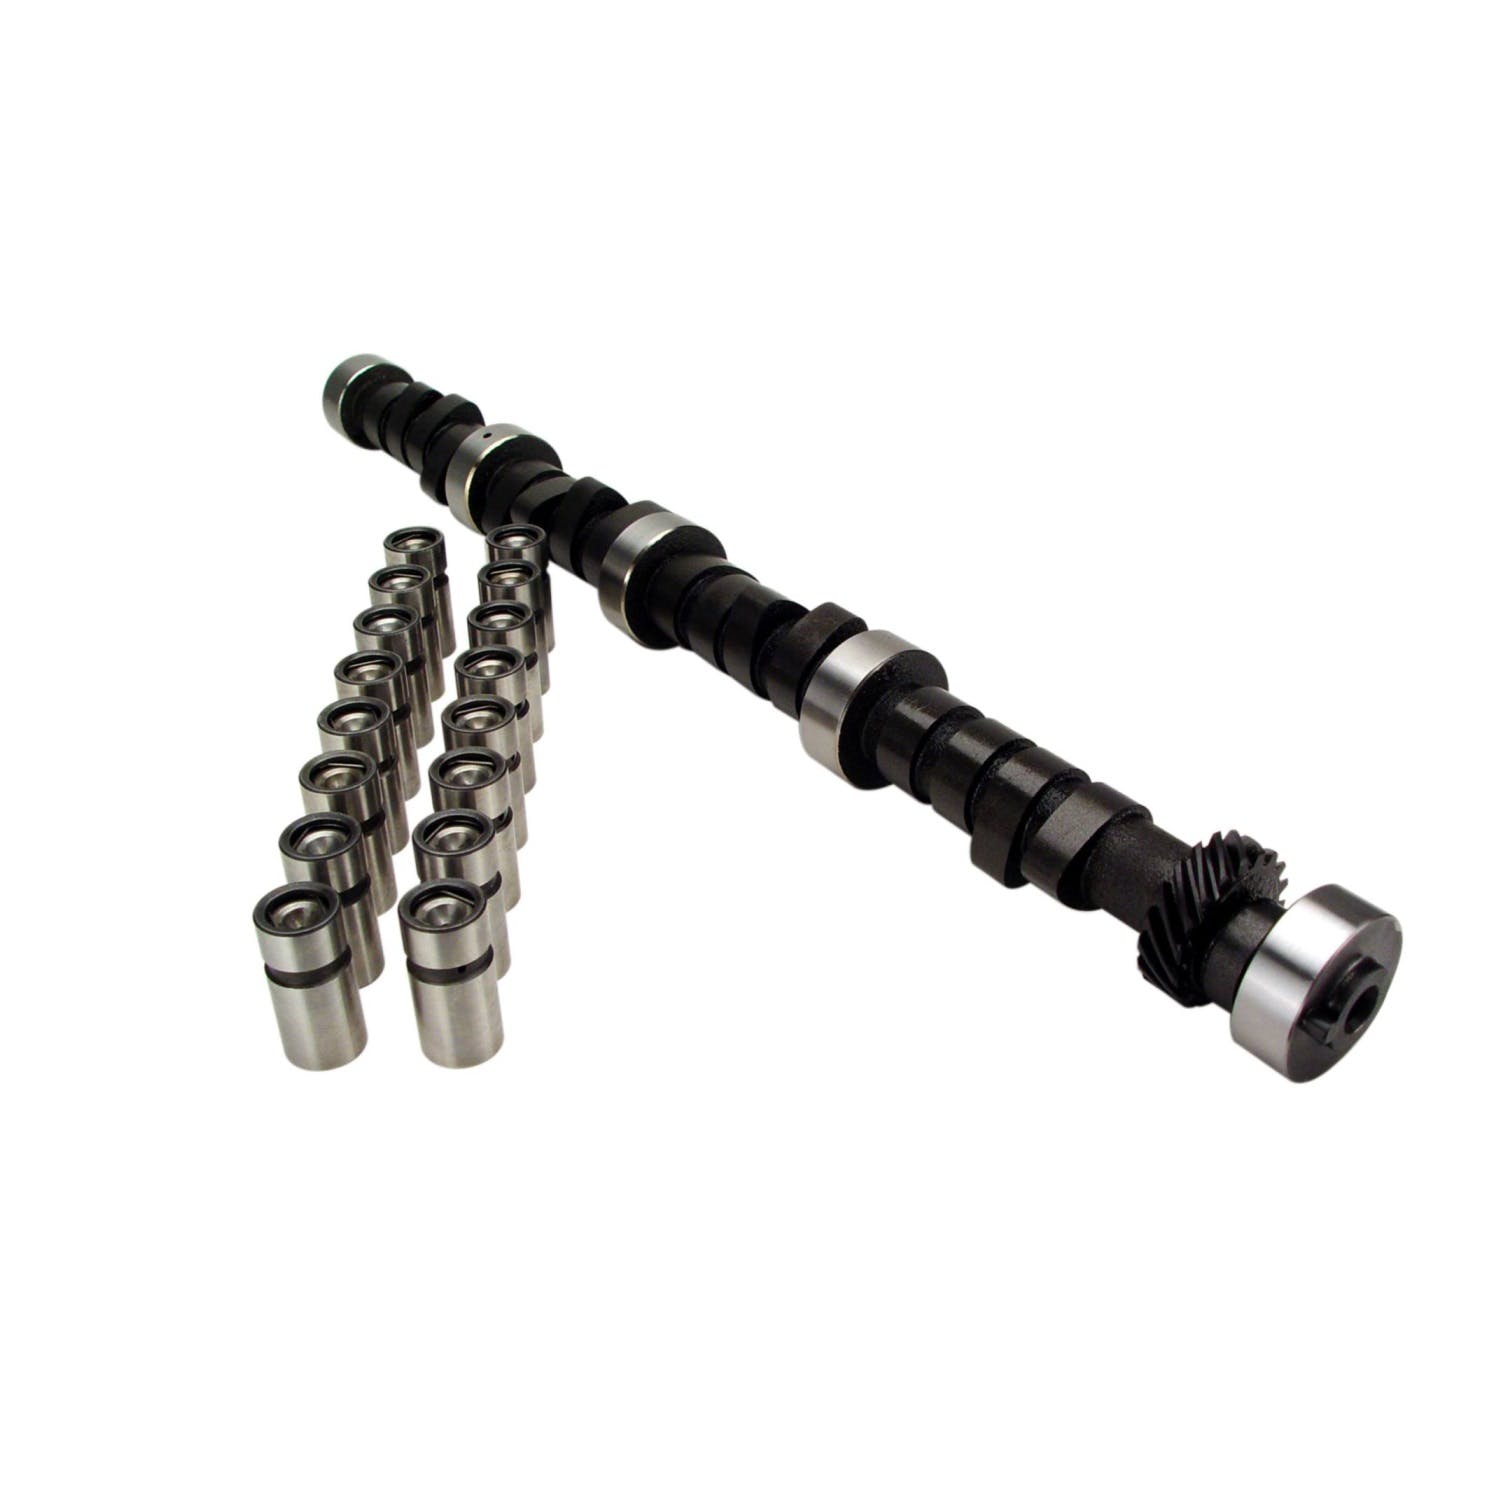 Competition Cams CL21-601-5 Mutha Thumpr Camshaft/Lifter Kit